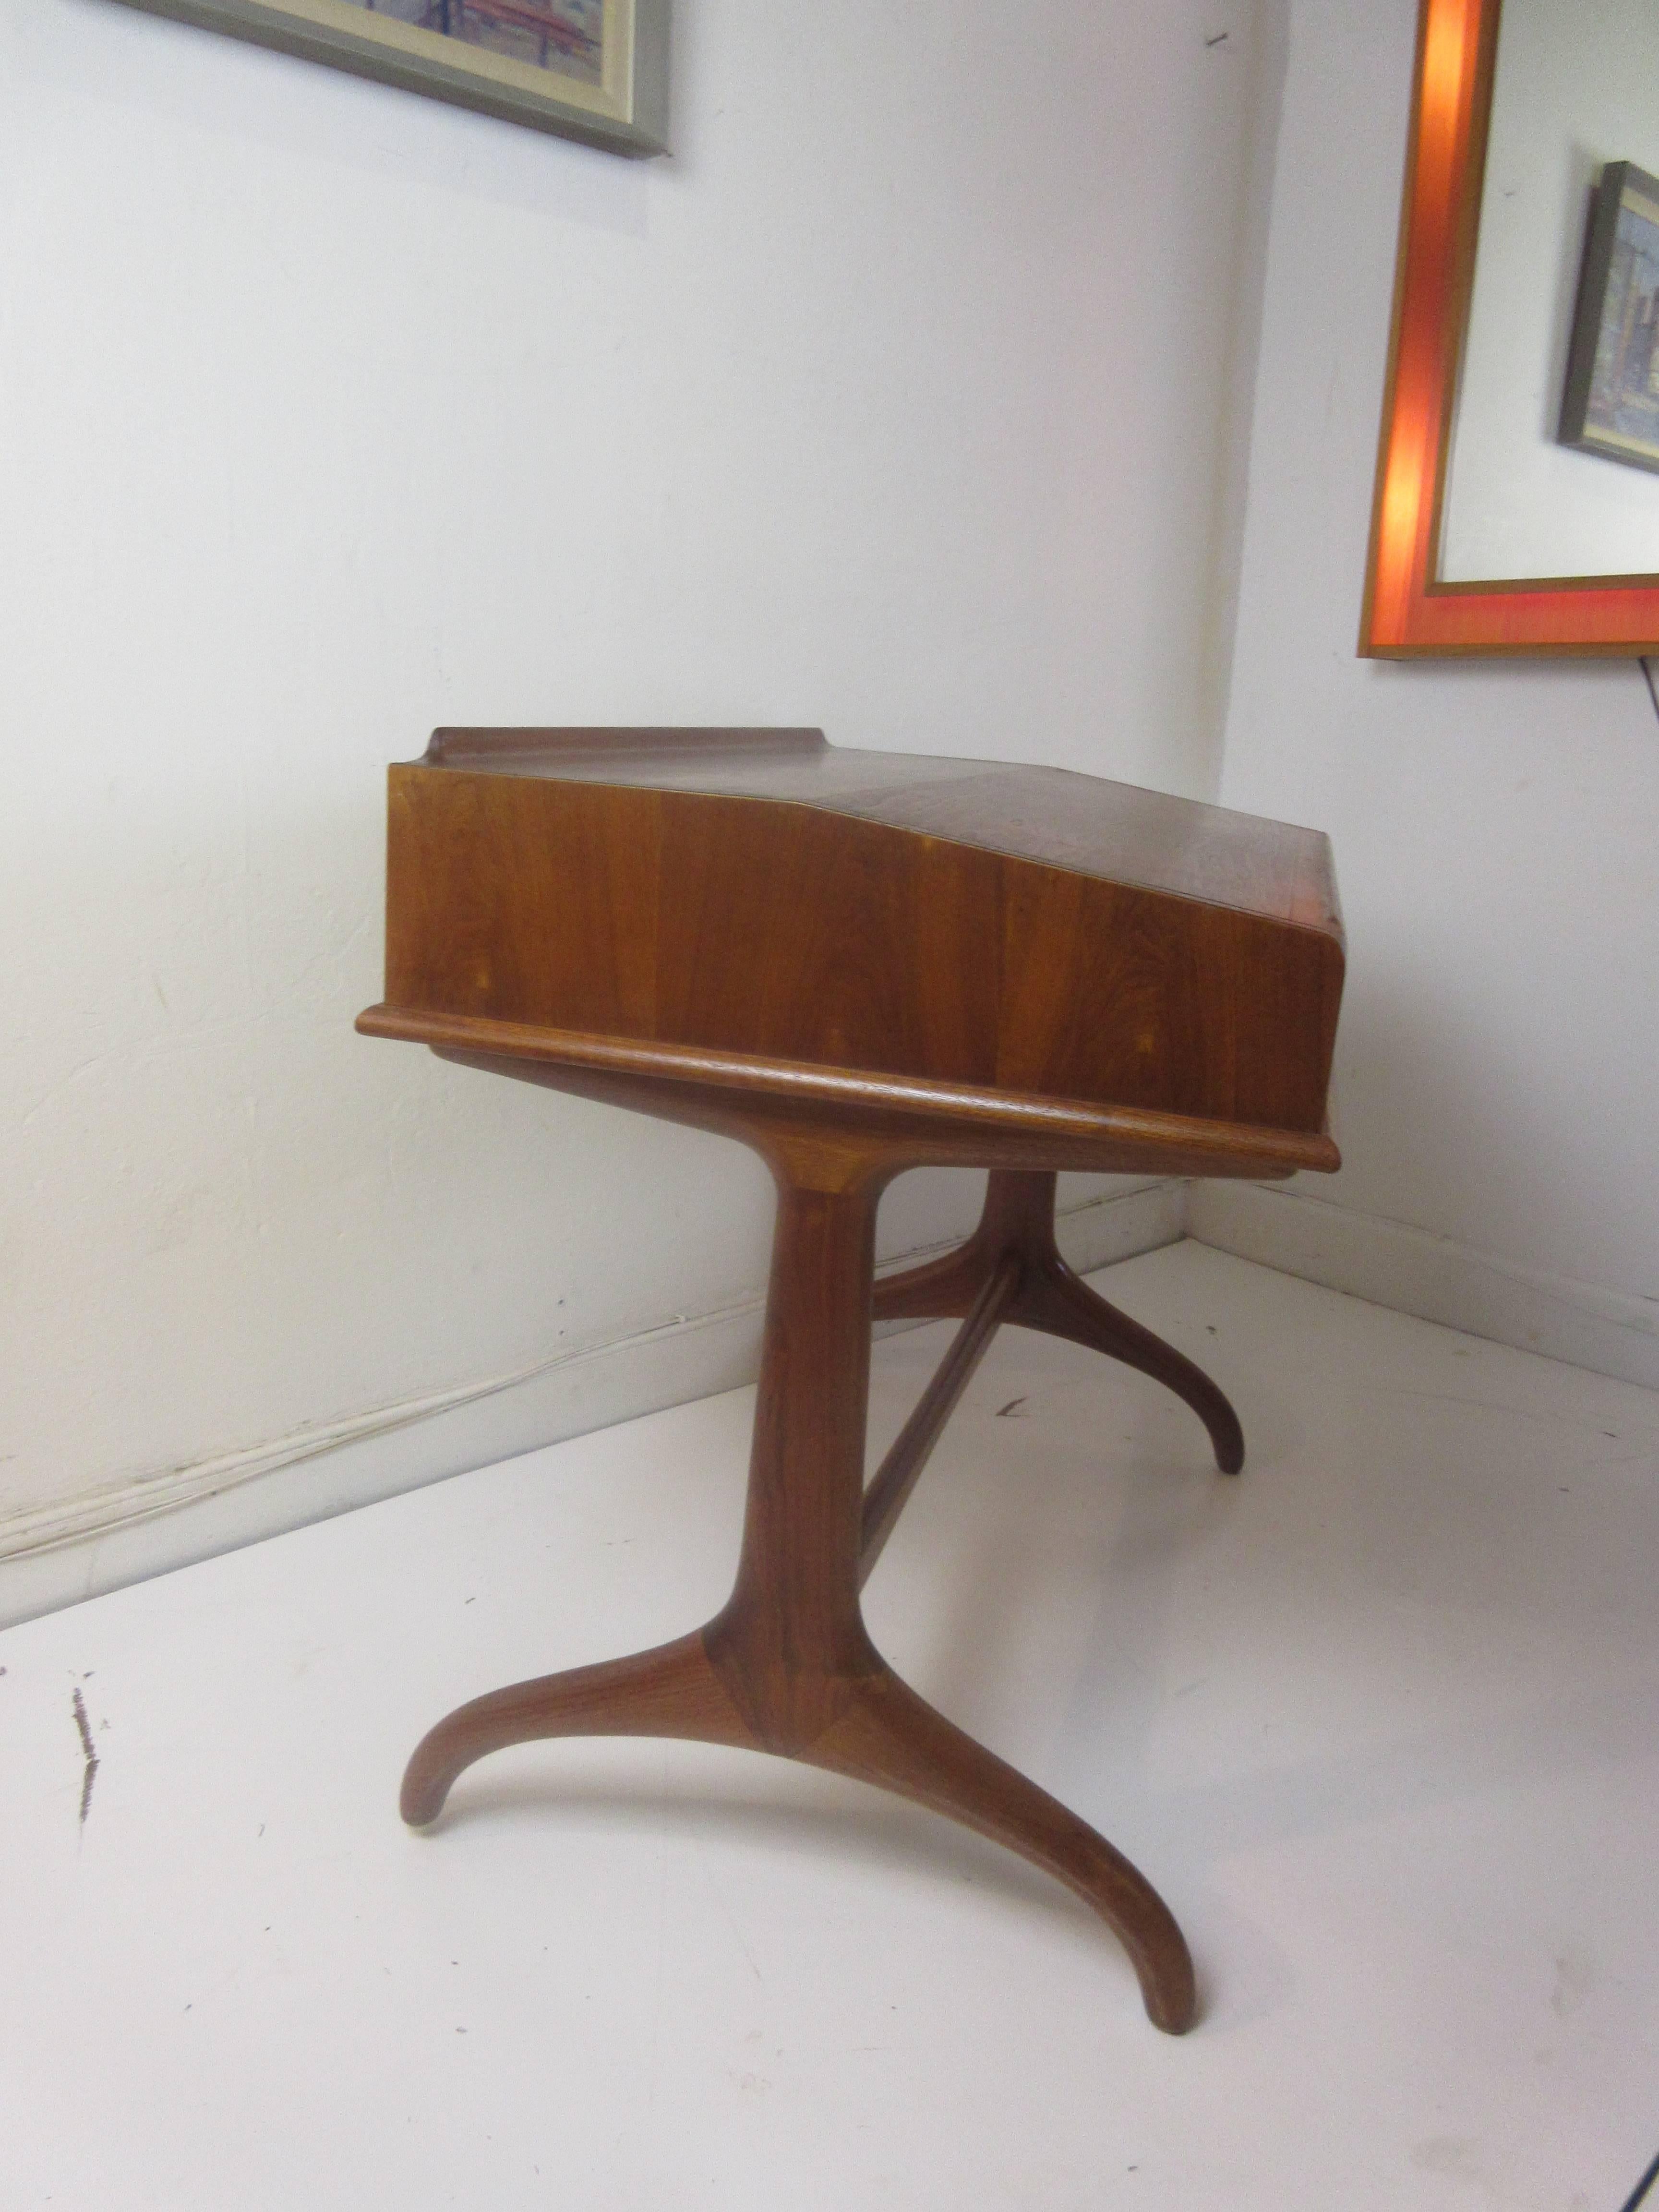 Henredon teak writing desk from the 1960s. Perfect for a computer monitor on the level top and the slanted writing surface has a lip to secure your keyboard and it will be tilted toward you. Graceful bowed legs are joined by a curved tendon. A large